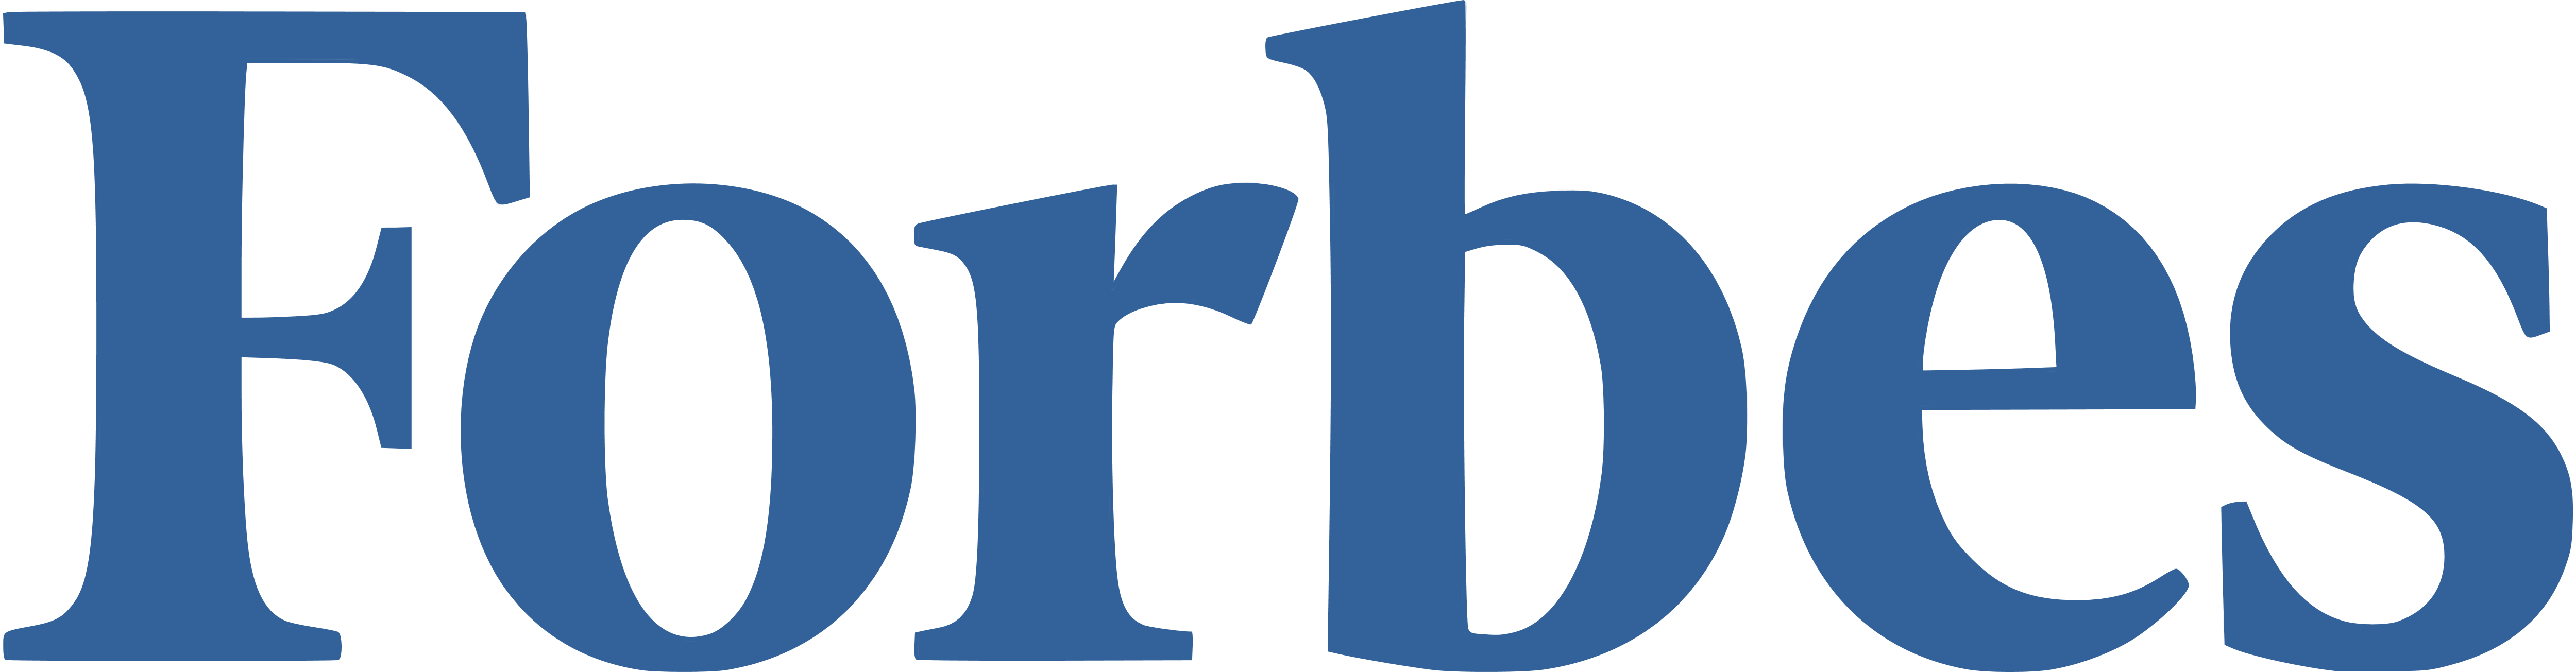 Forbes Logo Png Image With Tr